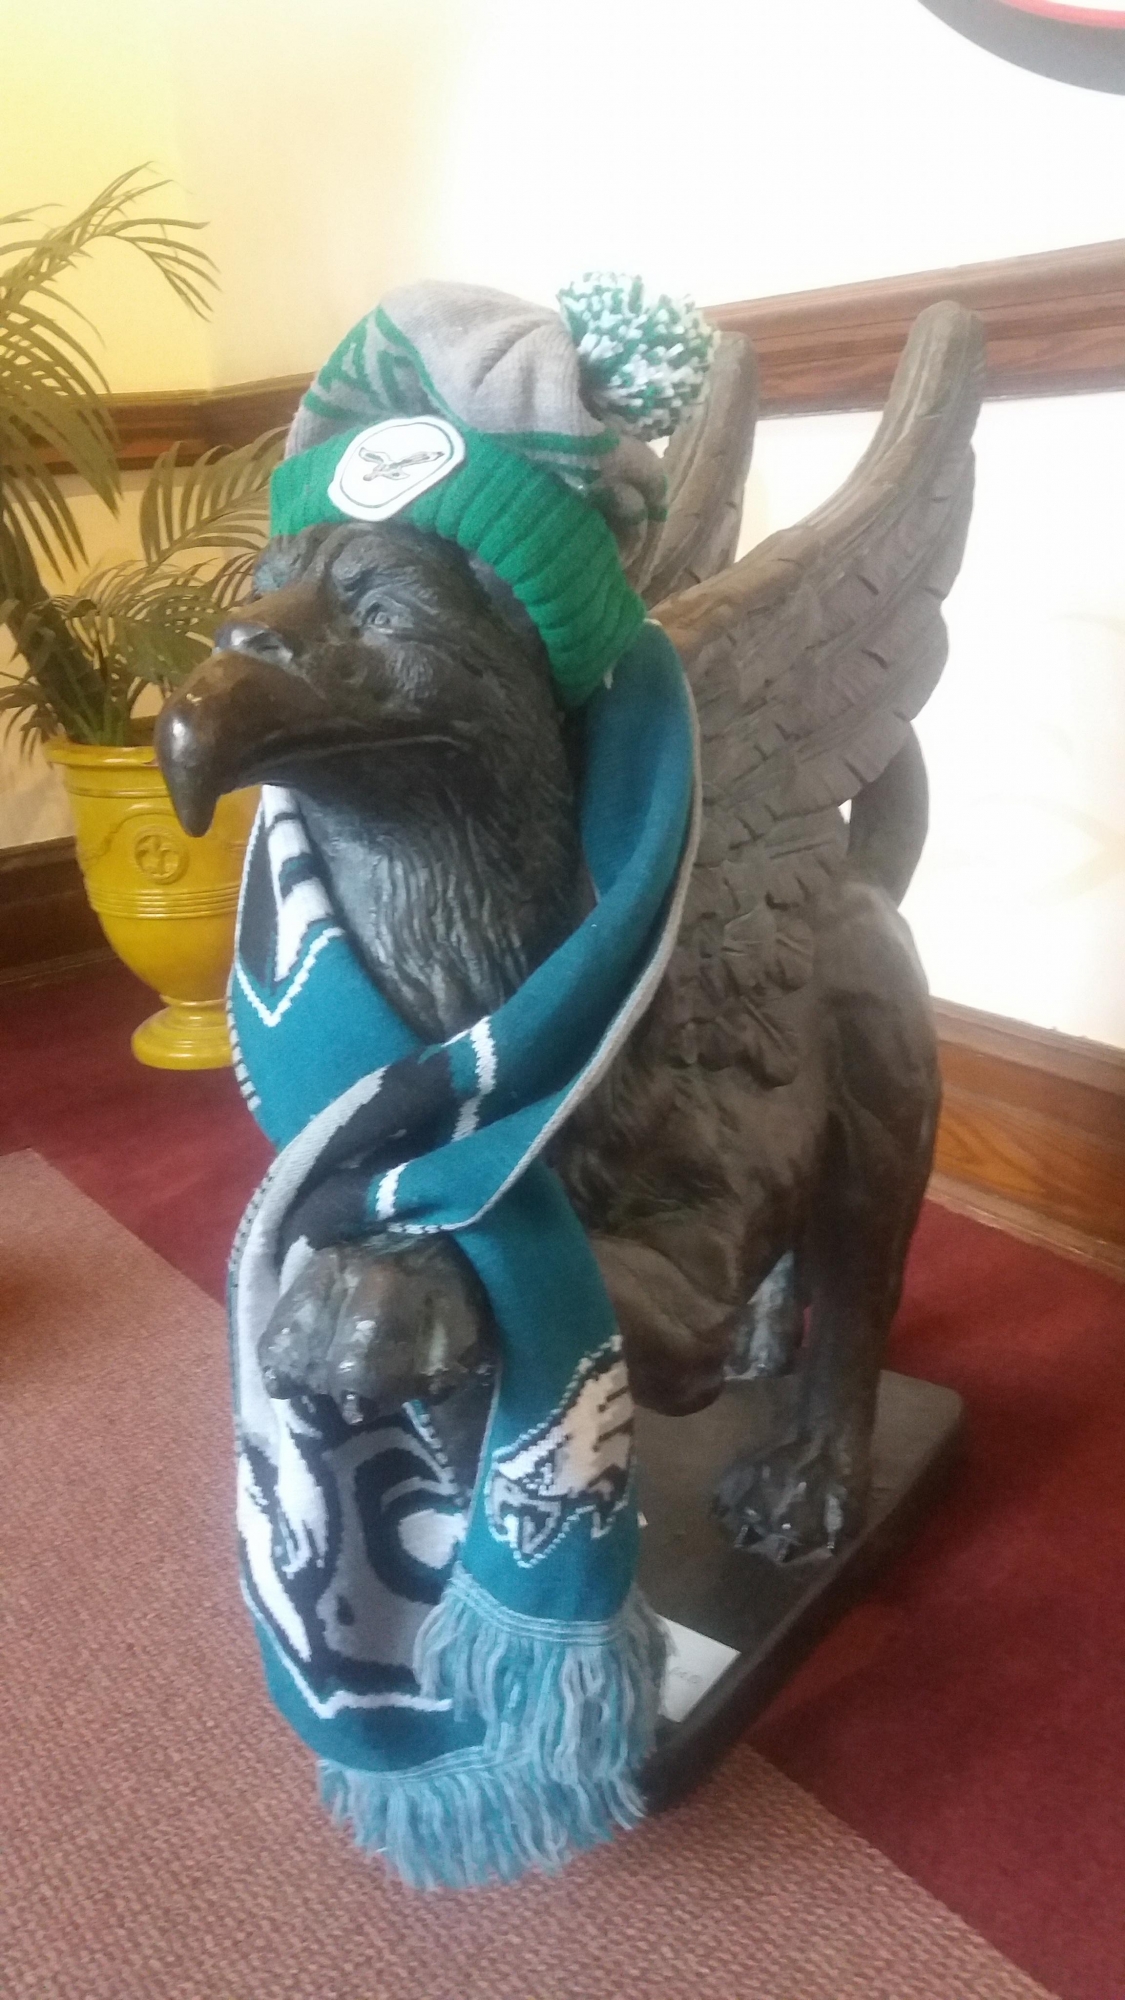 Even our little Griffin statue went 'green' for the week!